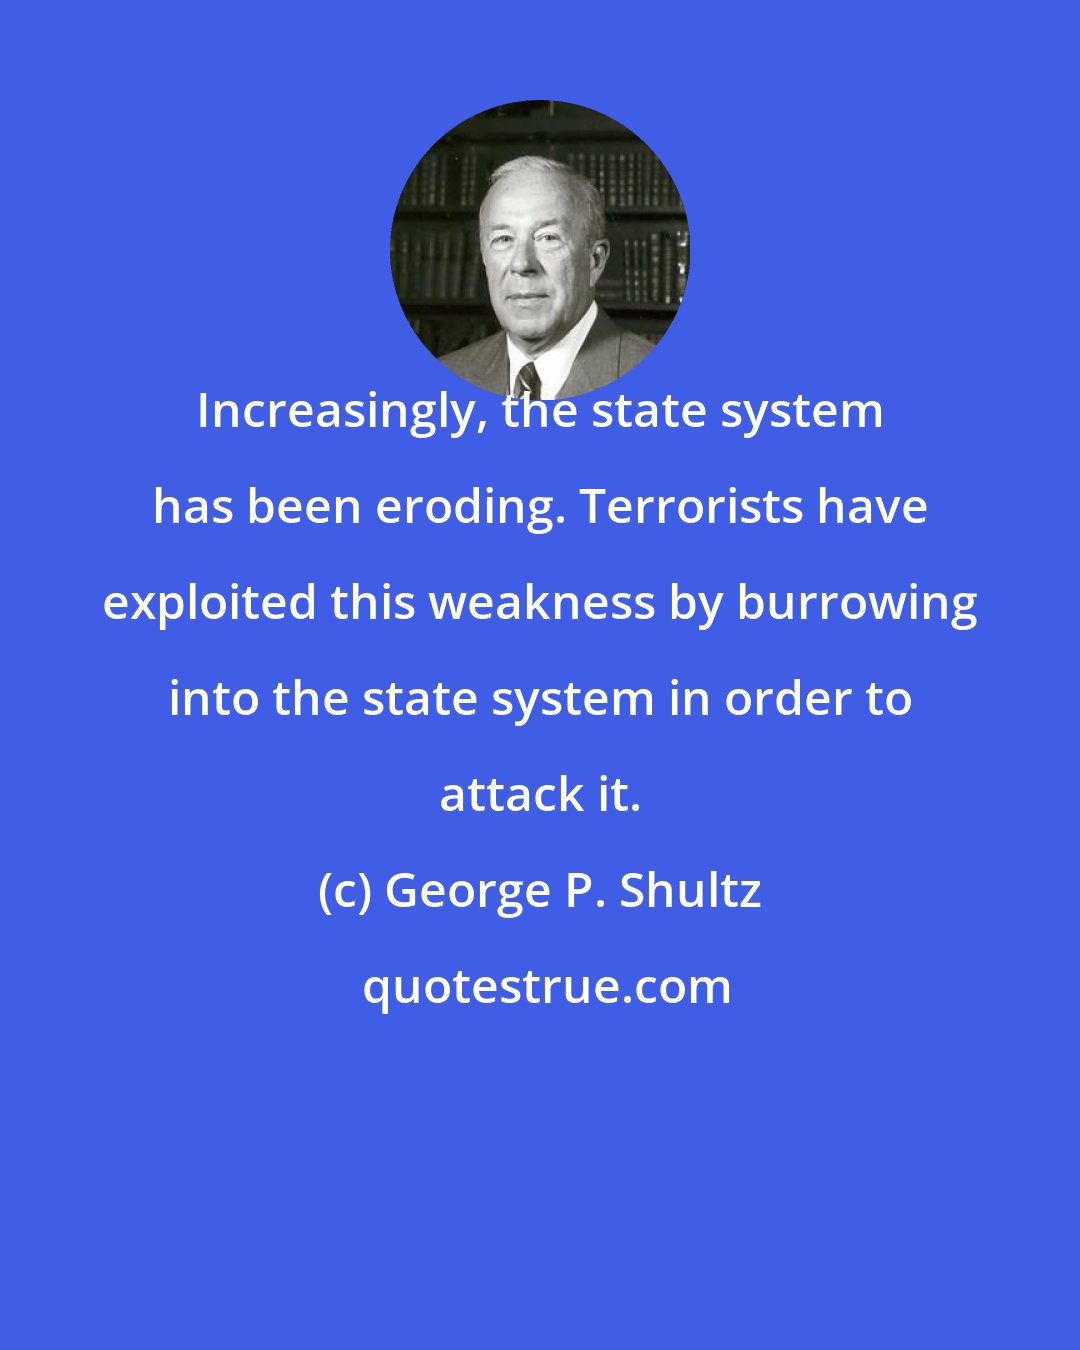 George P. Shultz: Increasingly, the state system has been eroding. Terrorists have exploited this weakness by burrowing into the state system in order to attack it.